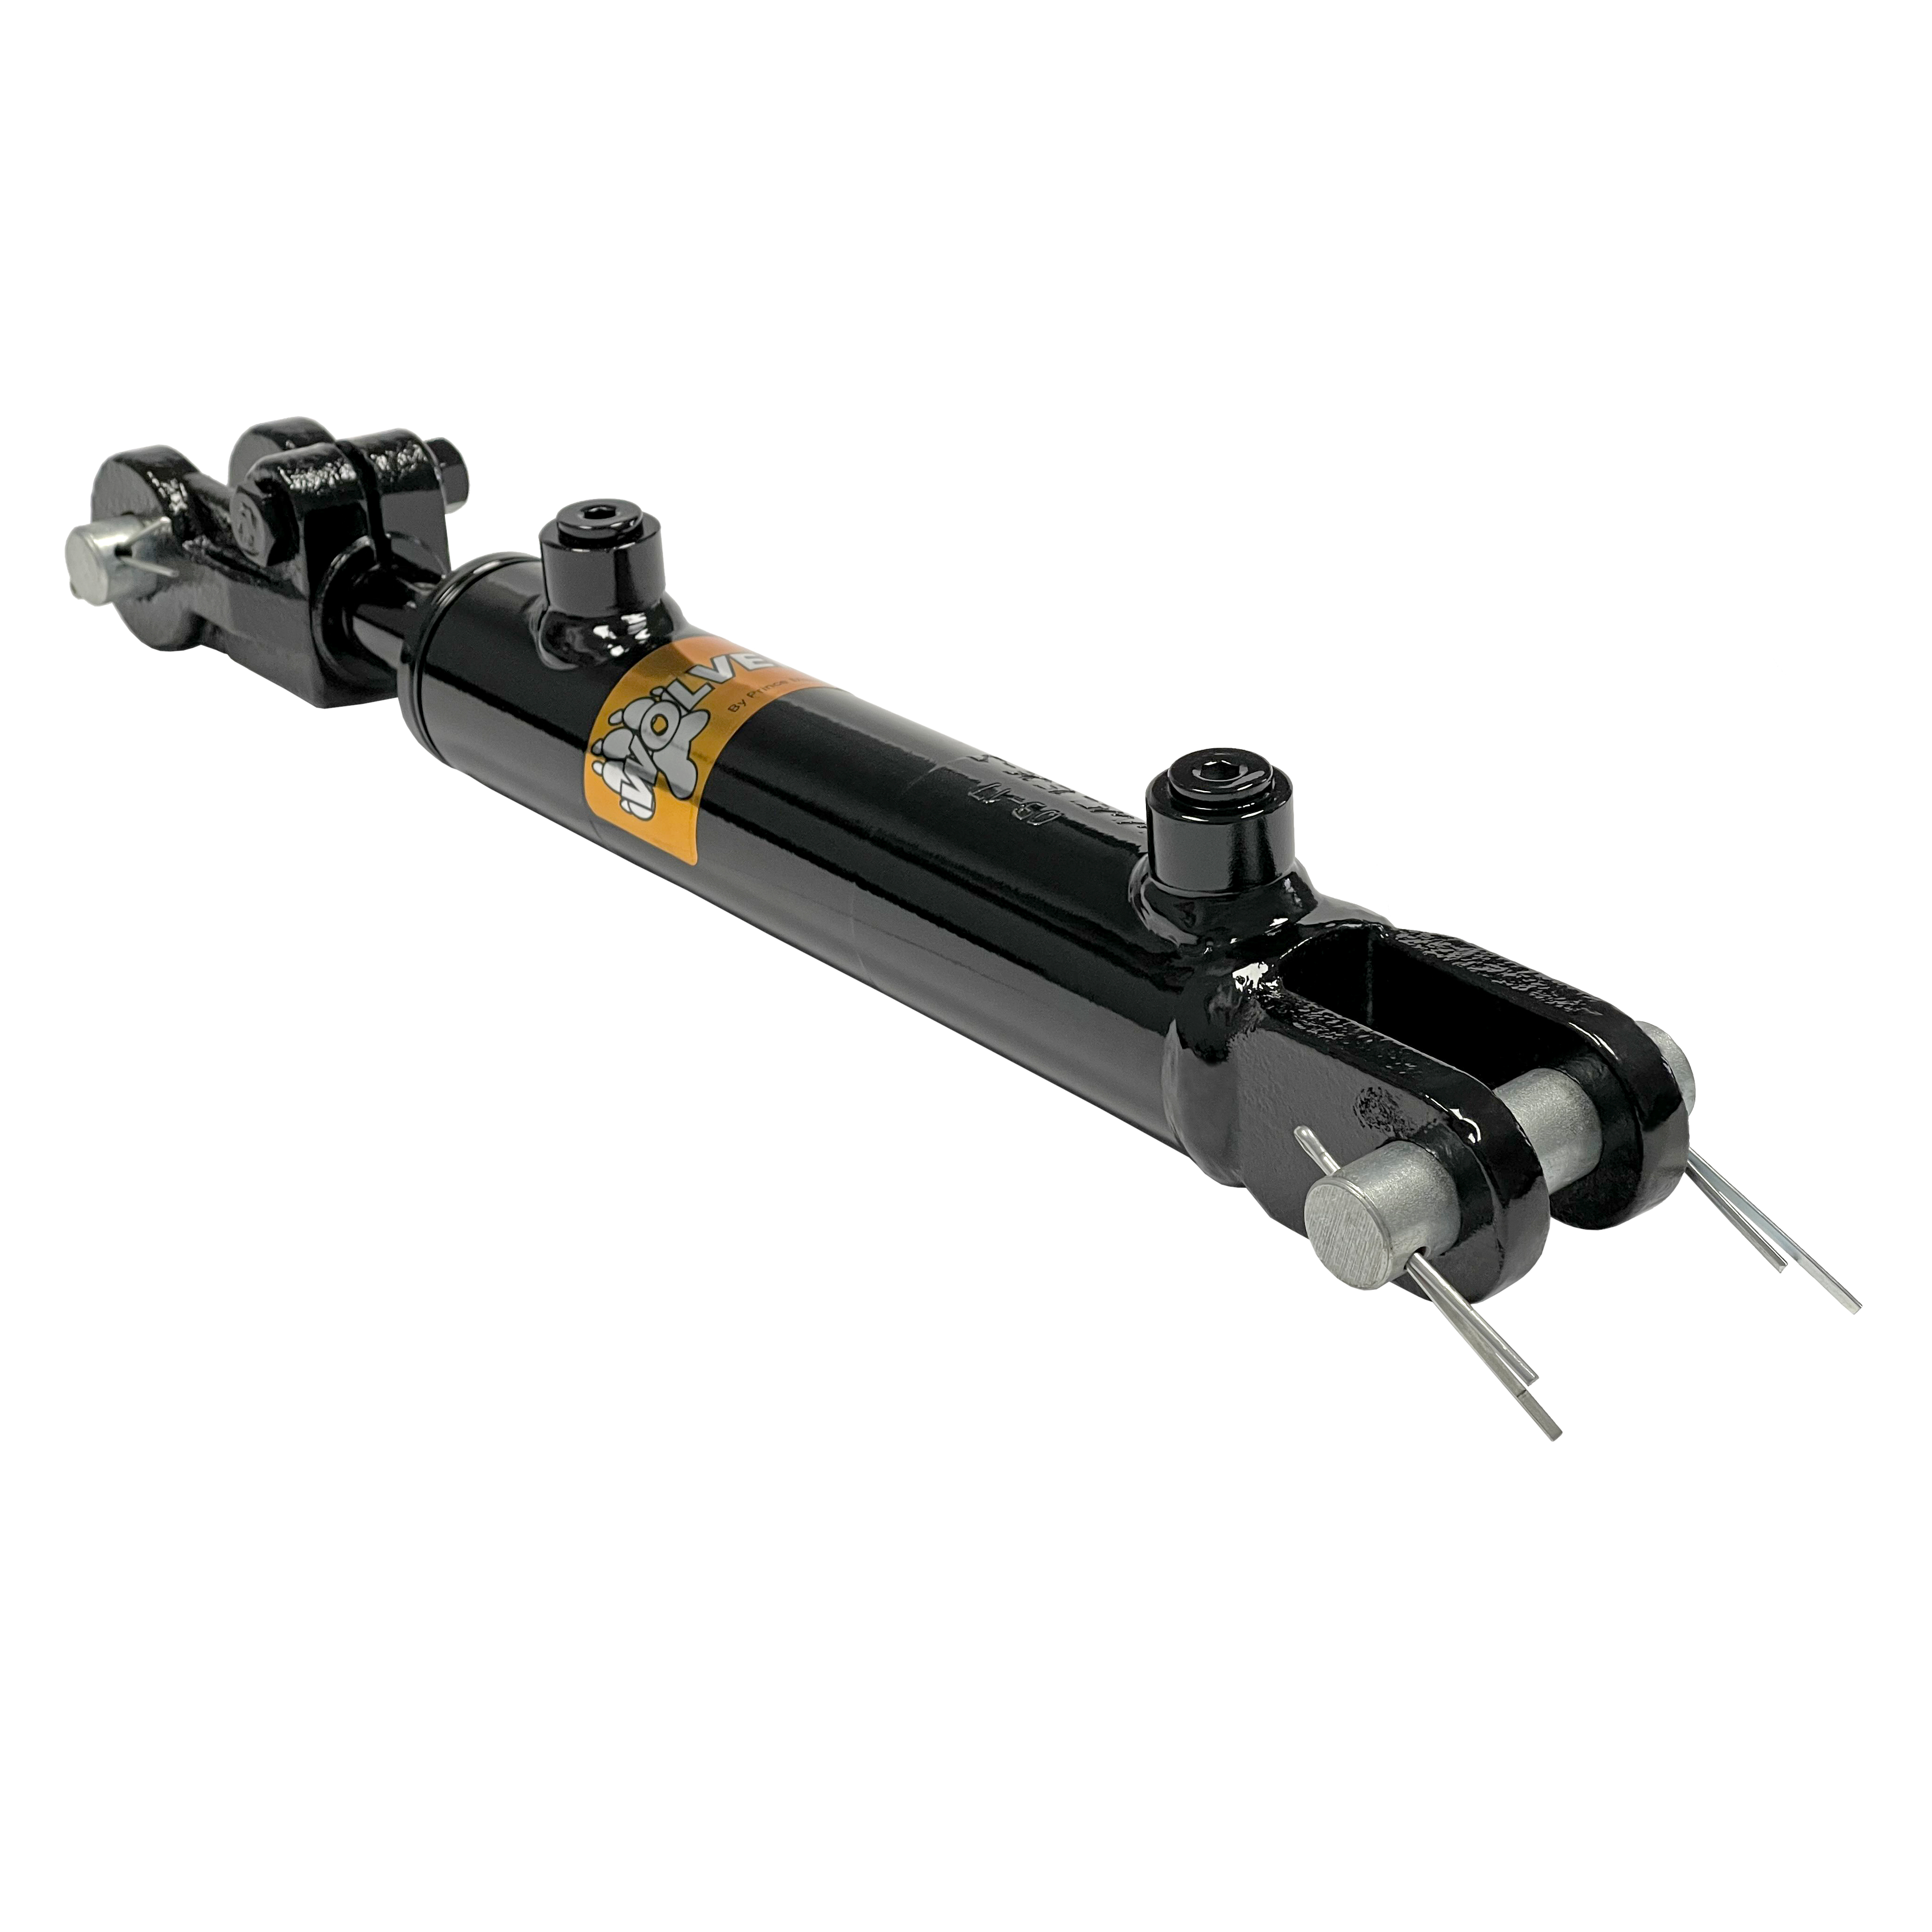 1.5 bore x 8 stroke Clevis hydraulic cylinder, welded Clevis double acting cylinder | Prince Hydraulics